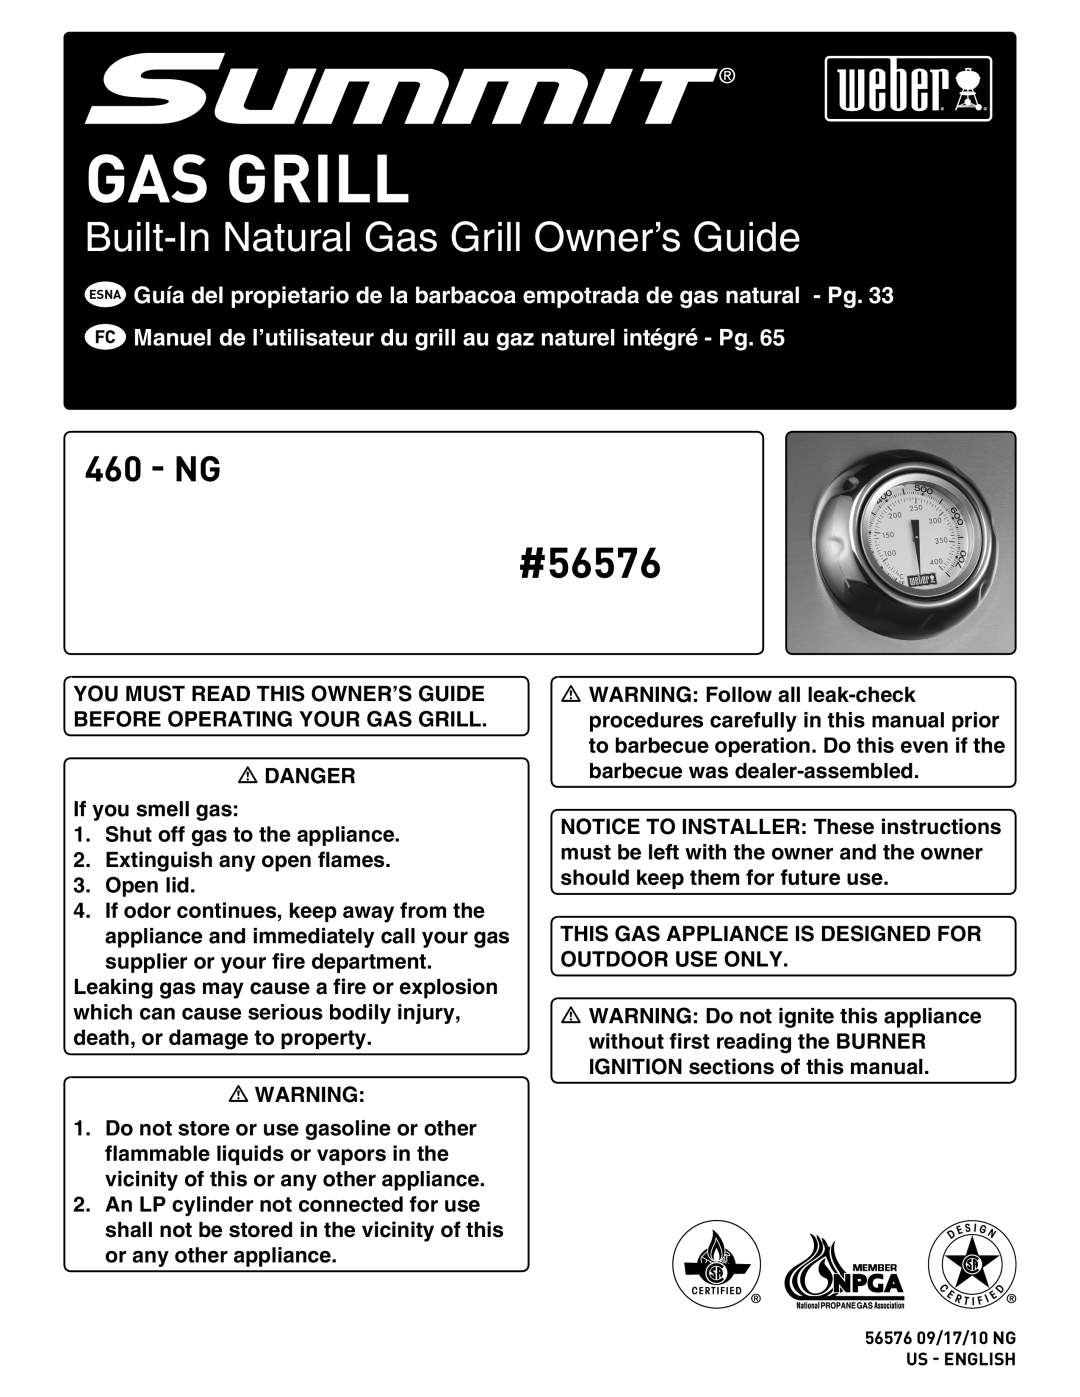 Weber Summit Gas Grill manual #56576, Built-In Natural Gas Grill Owner’s Guide, Ng 